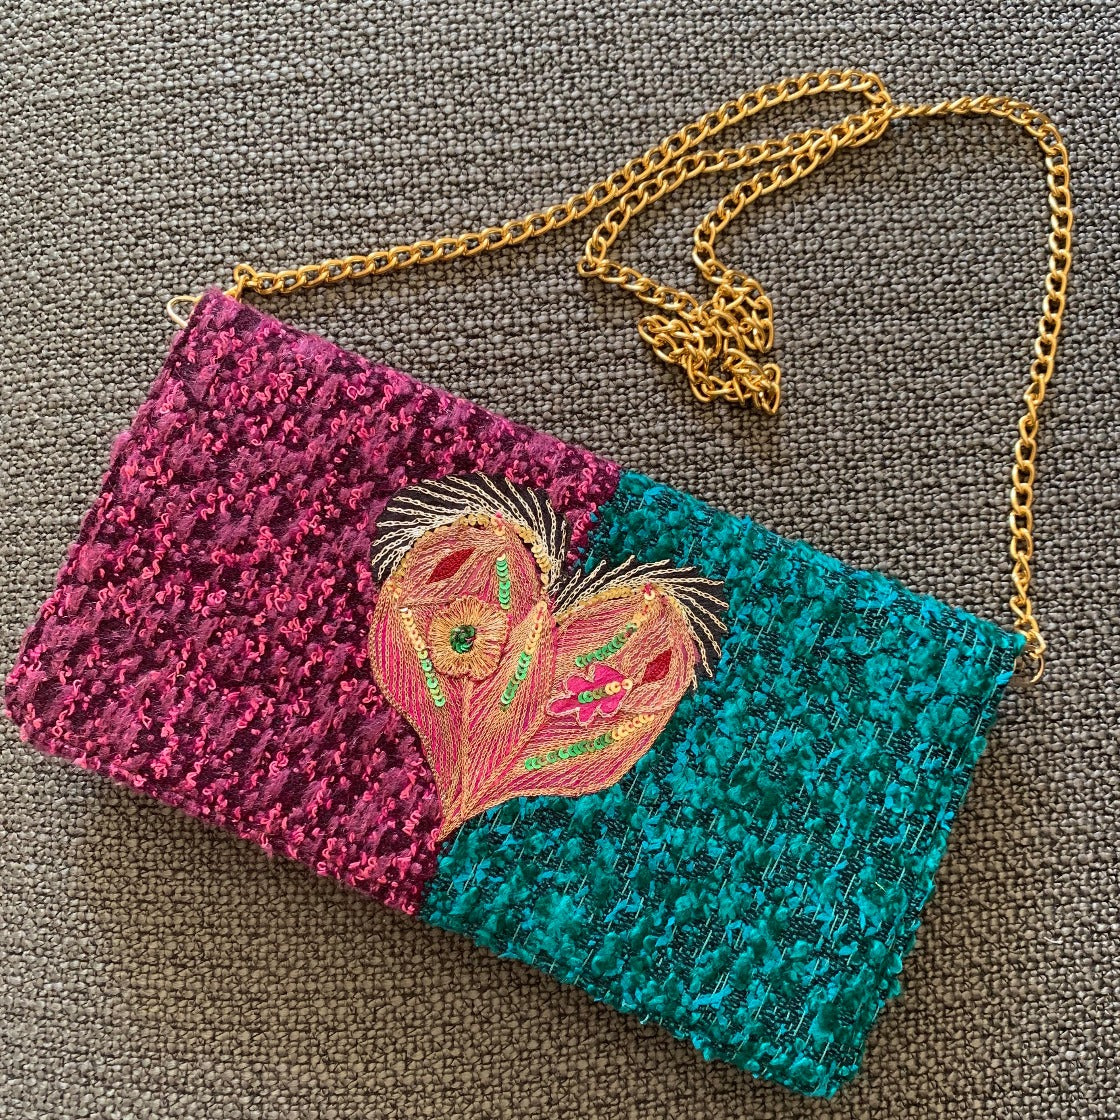 Vintage purple and emerald clutch with embroidered heart